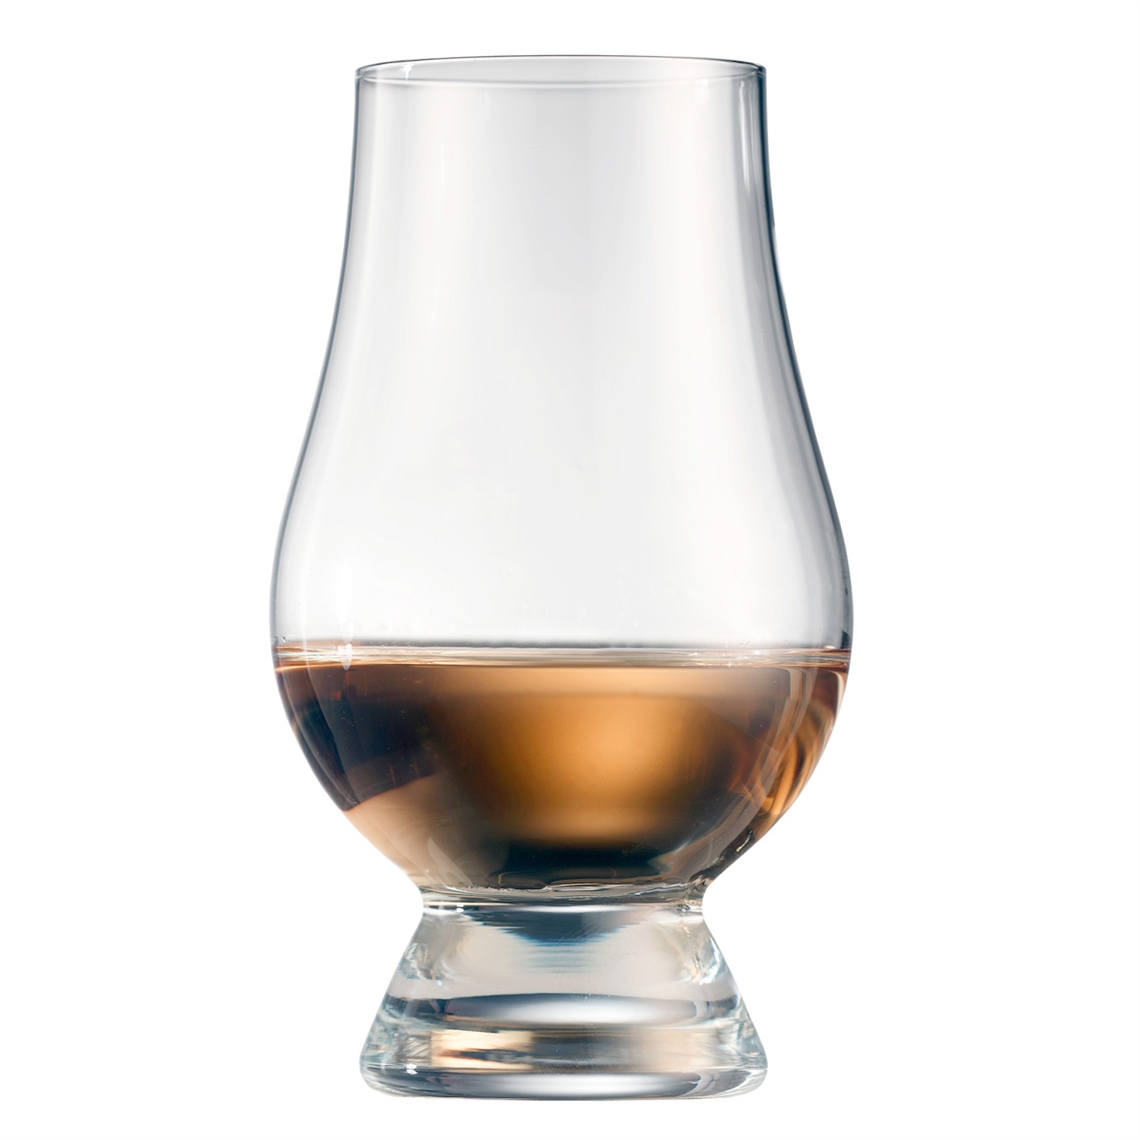 View more beginners guide to different types of wine glasses from our Whisky Glasses range